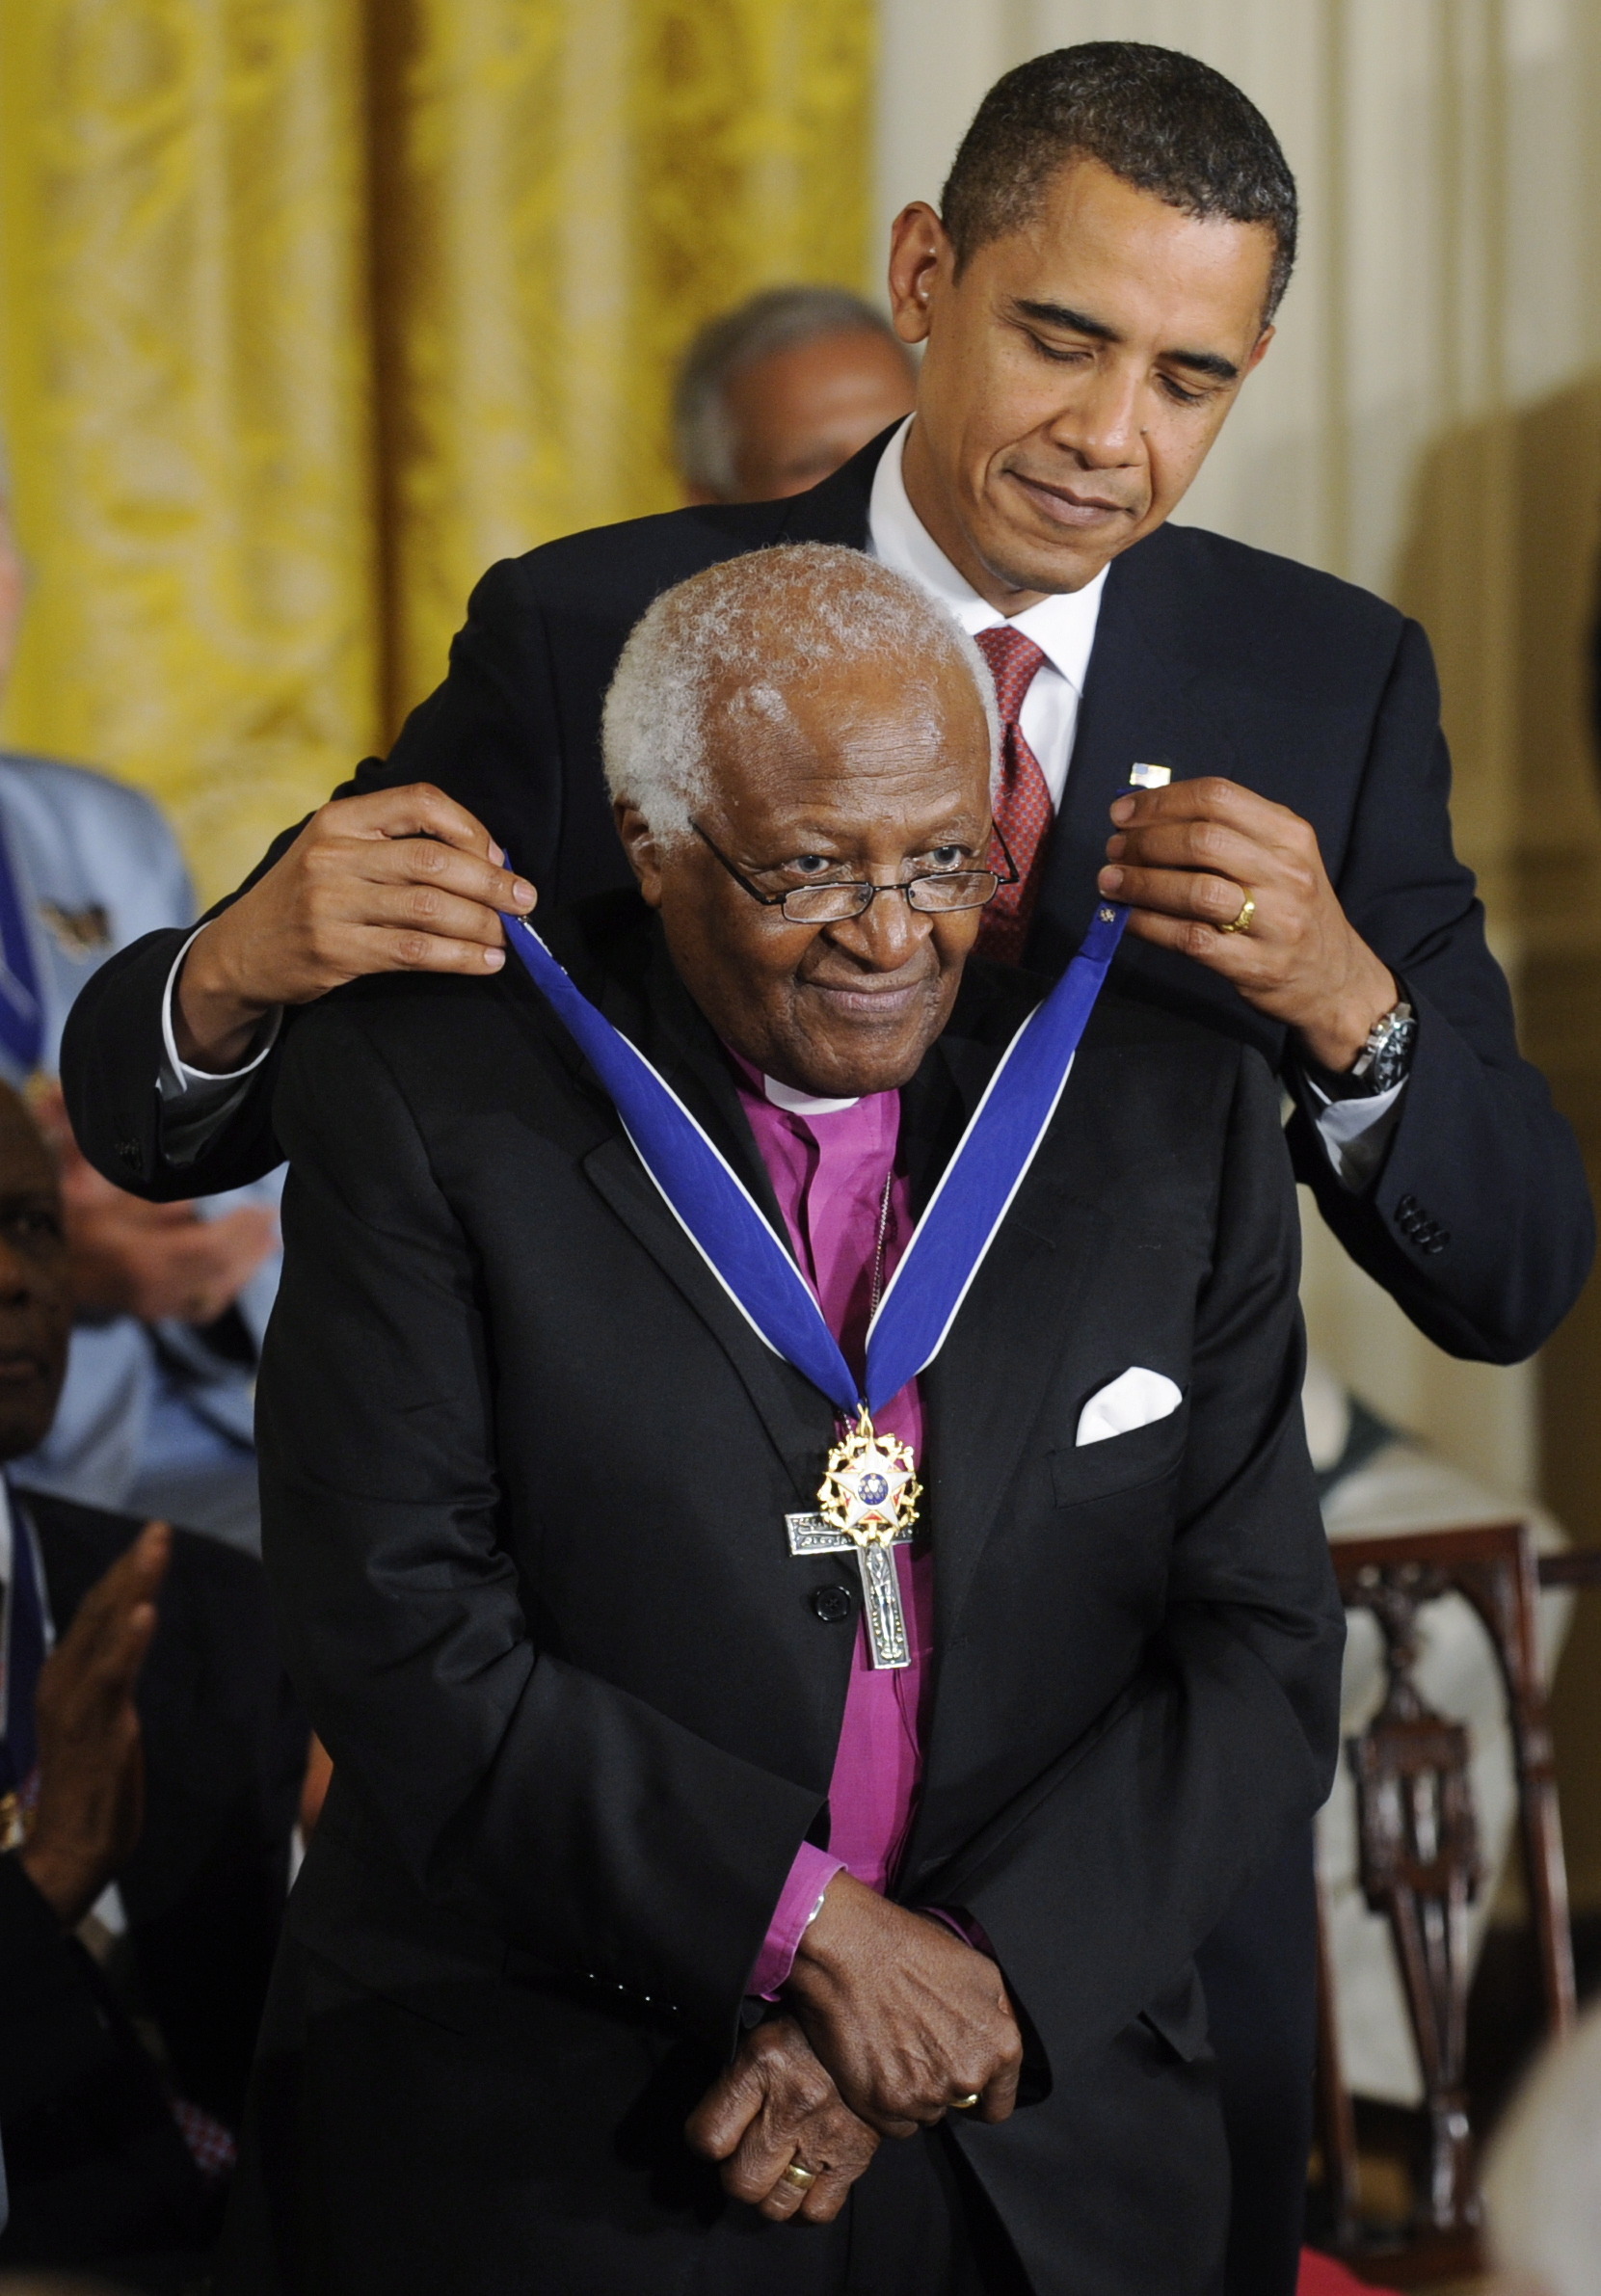 epa01922199 YEARENDER 2009 AUGUST US President Barack Obama awards Arch Bishop Emeritus Desmond Mpilo Tutu the Presidential Medal of Freedom during a ceremony in the East Room of the White House in Washington, D.C., USA, 12 August 2009. Tutu helped lead South Africa through apartheid and with an unshakable humility and firm commitment to our common humanity, he helped heal wounds and lay the foundation for a new nation. EPA/SHAWN THEW